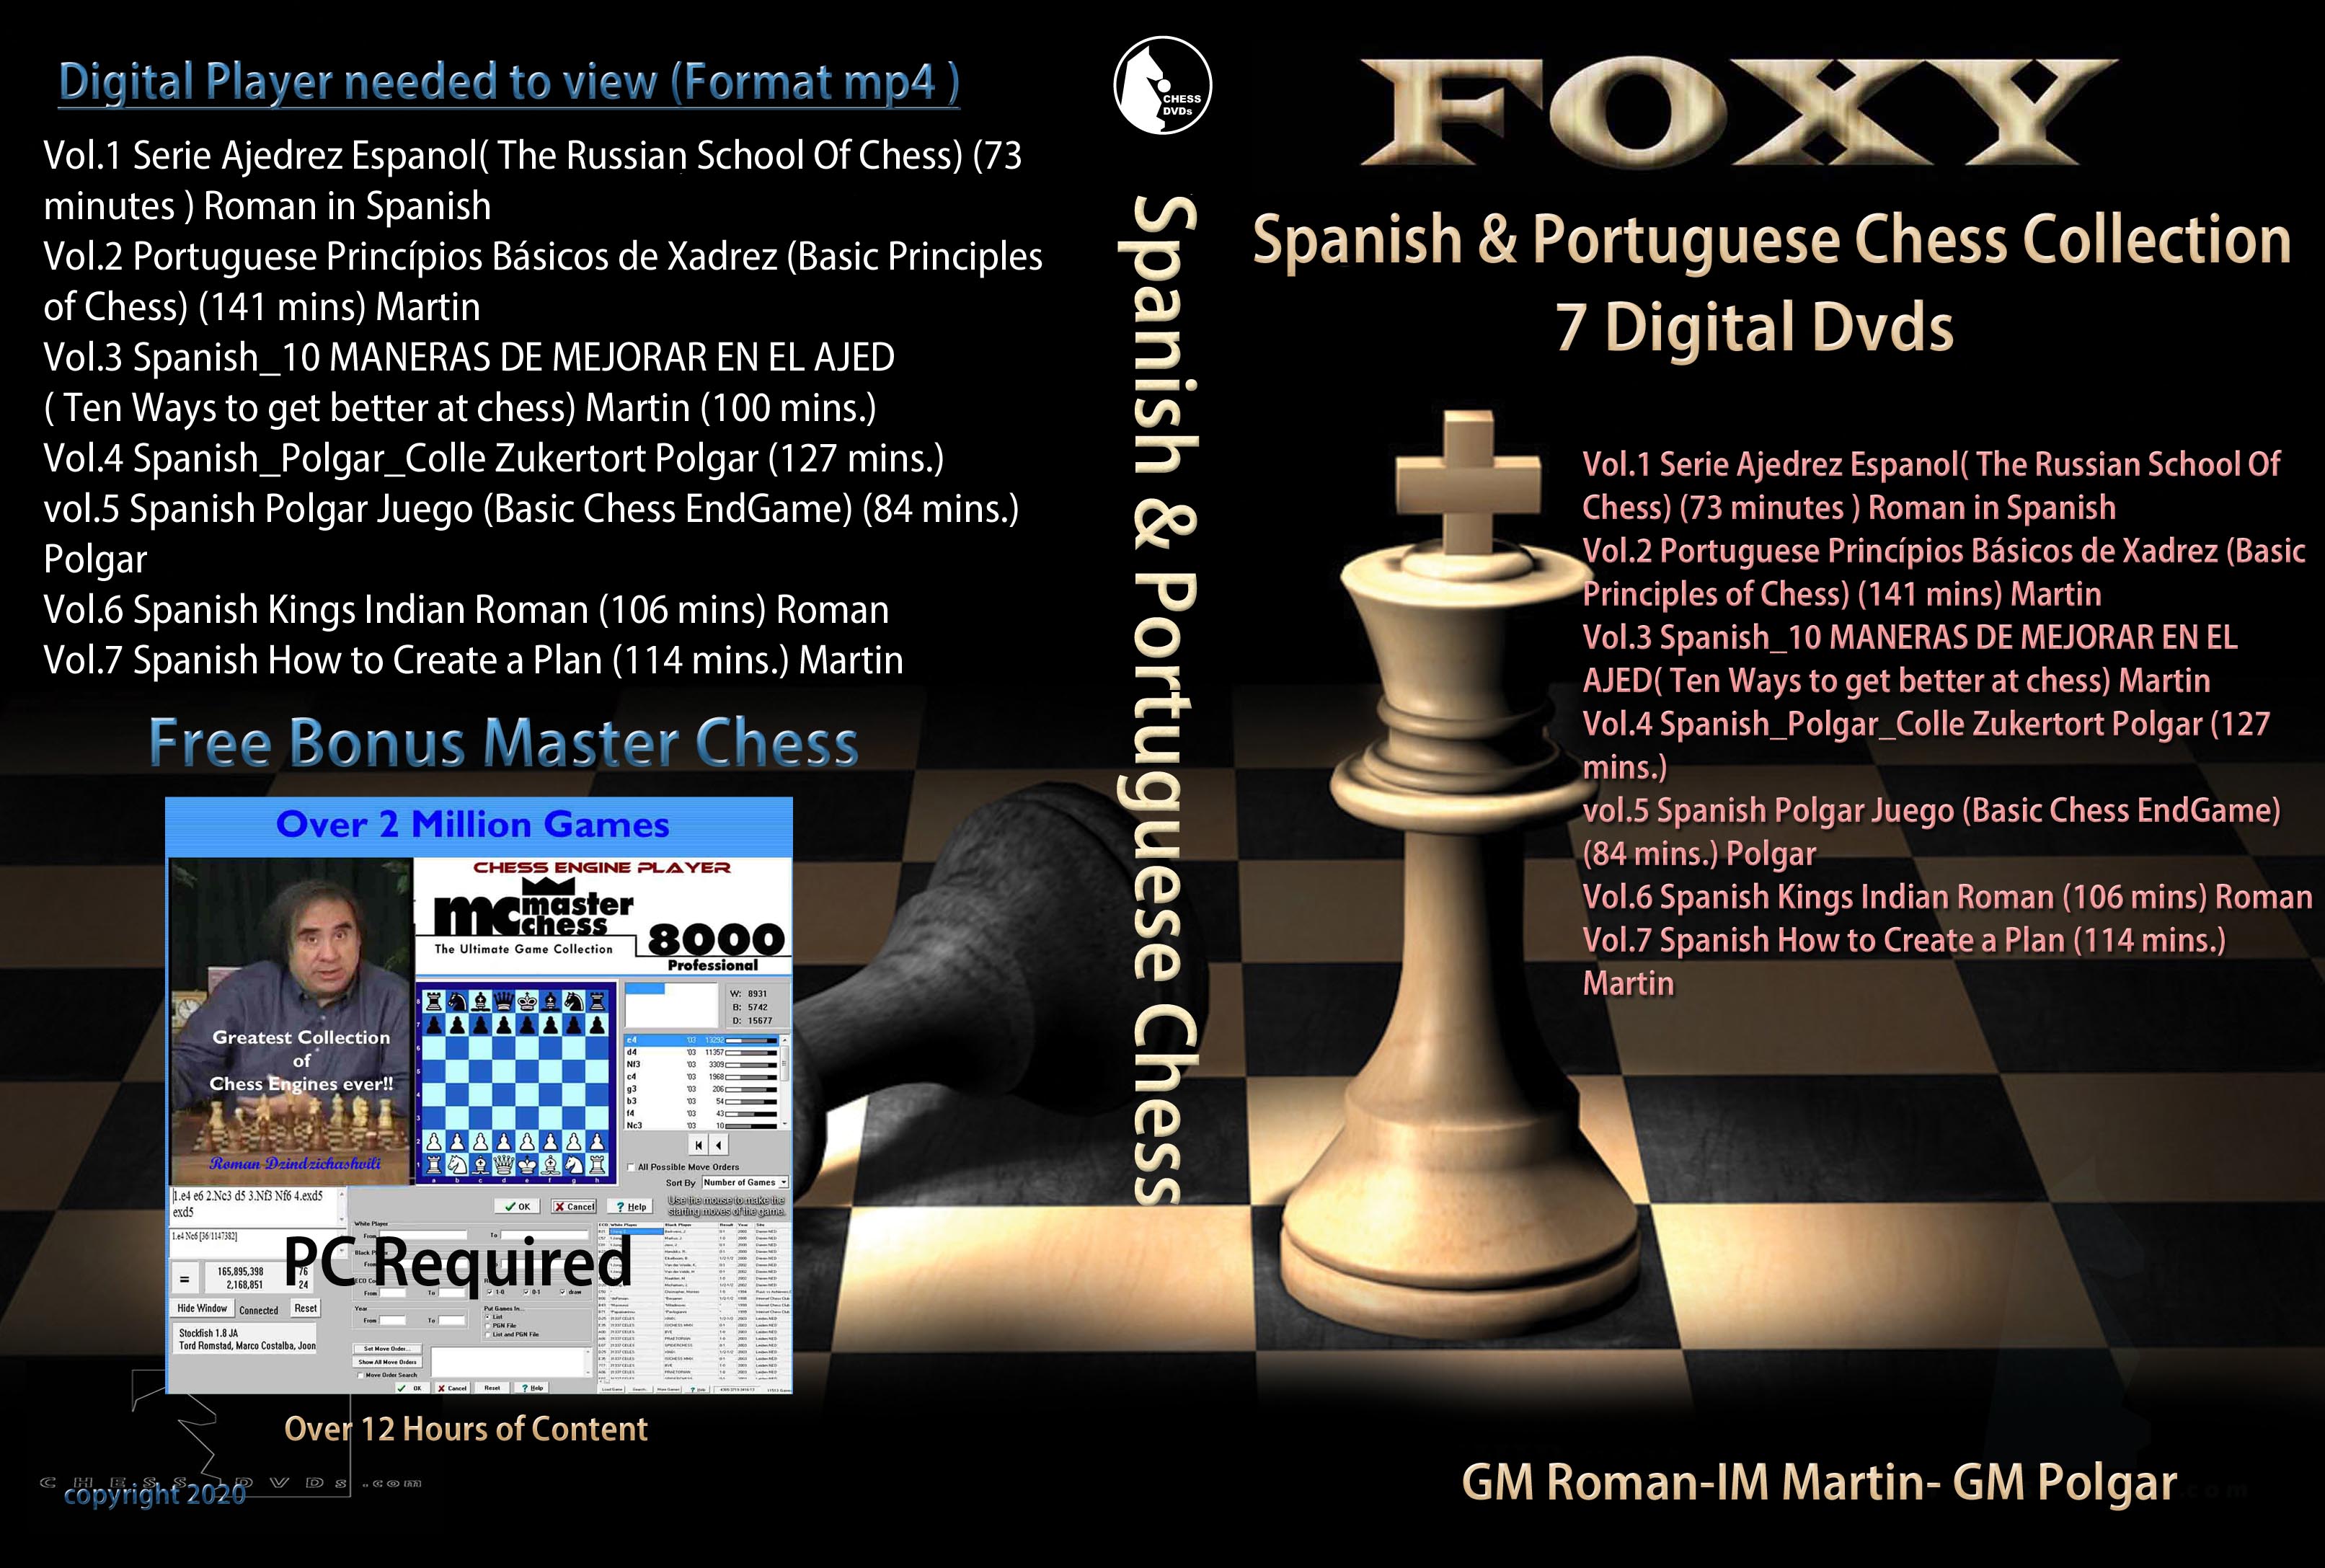 Spanish & Portuguese Chess Collection